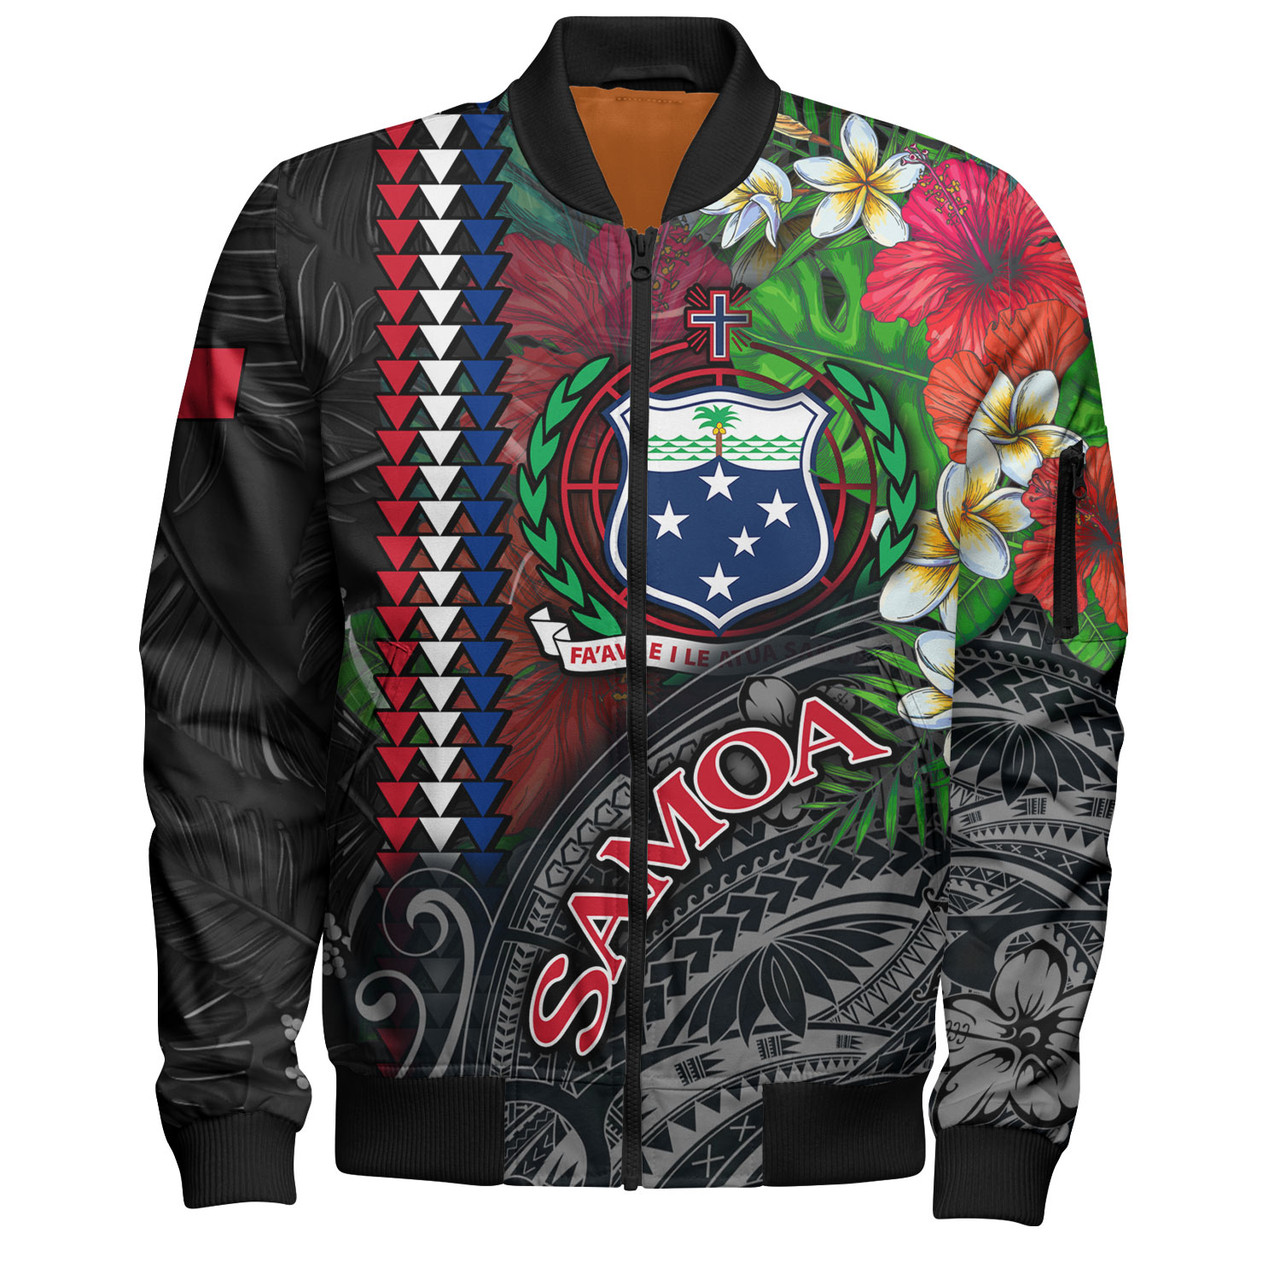 Samoa Custom Personalised Bomber Jacket Samoa Seal Hibiscus And Plumeria With Palm Branches Vintage Style